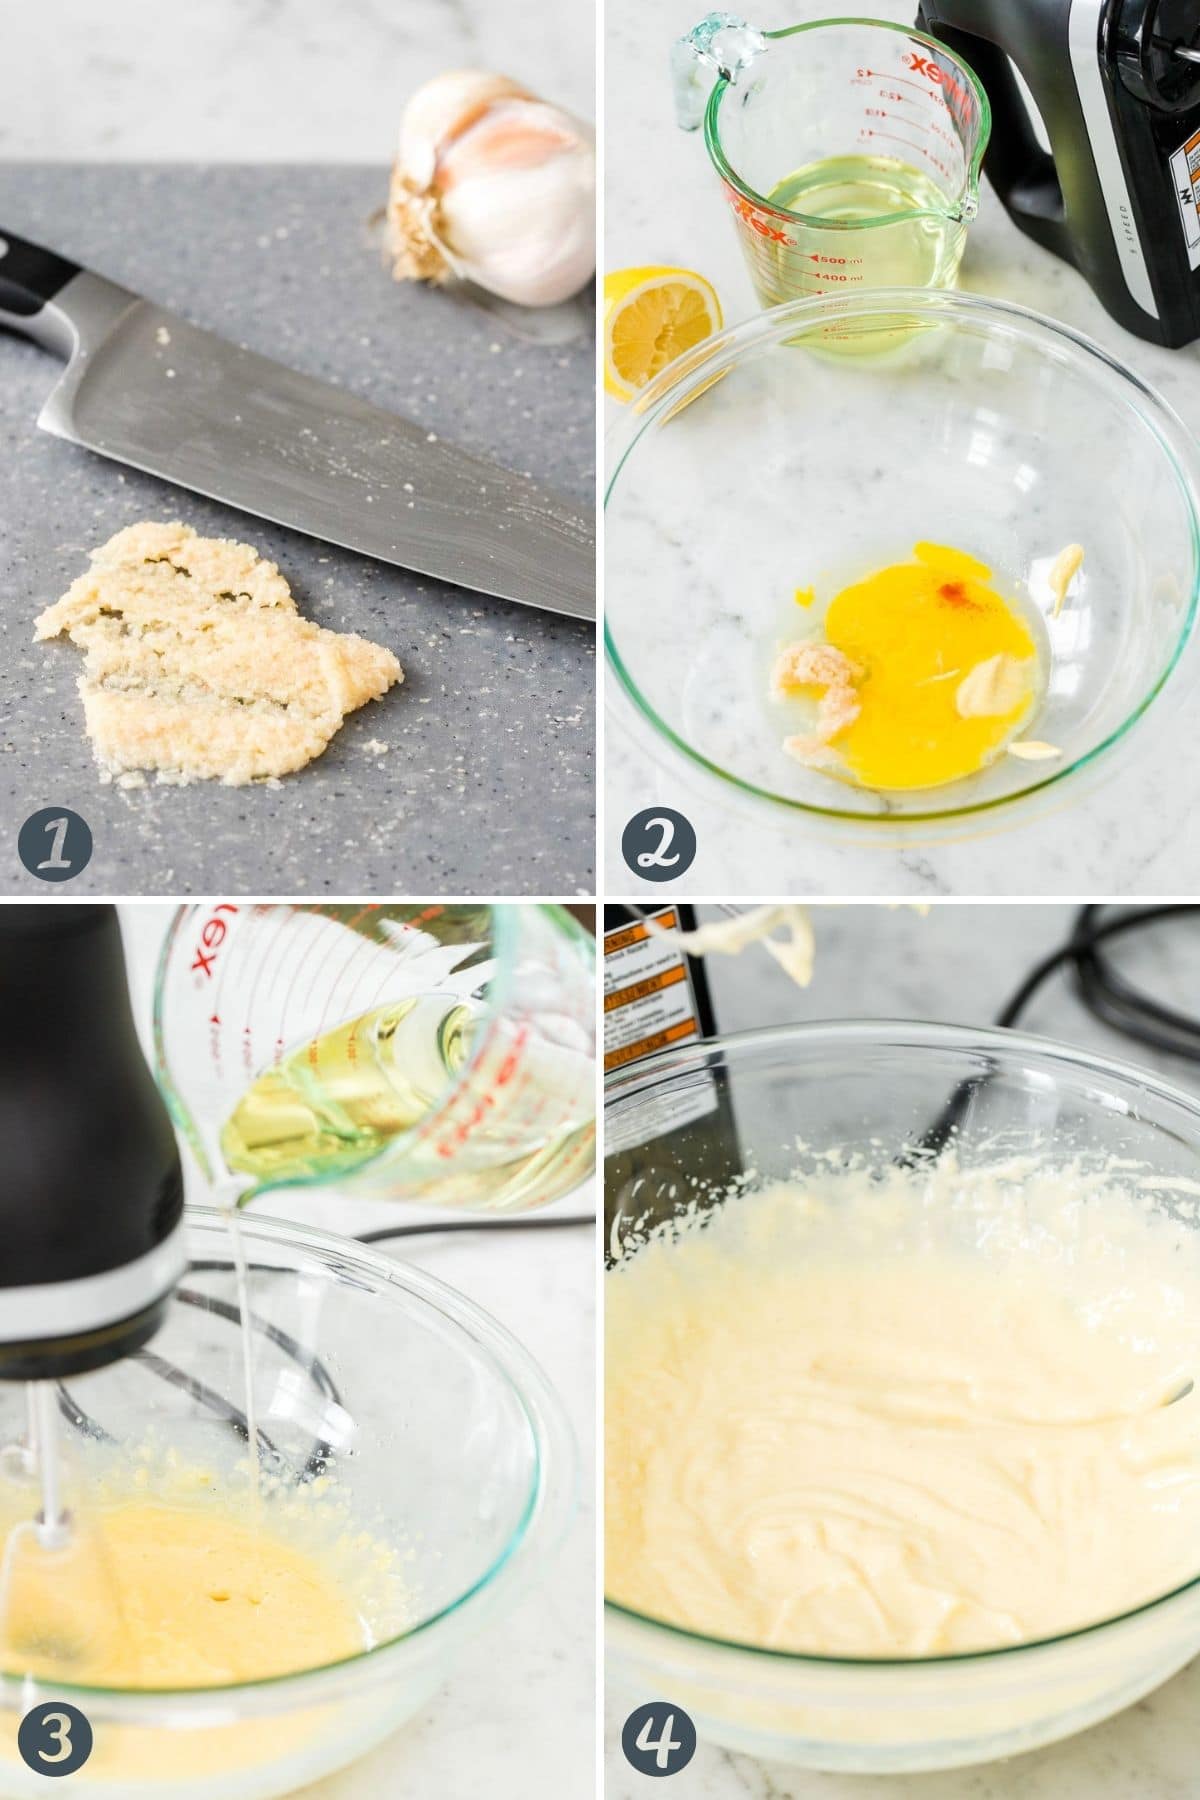 Steps for making traditional Aioli sauce from scratch